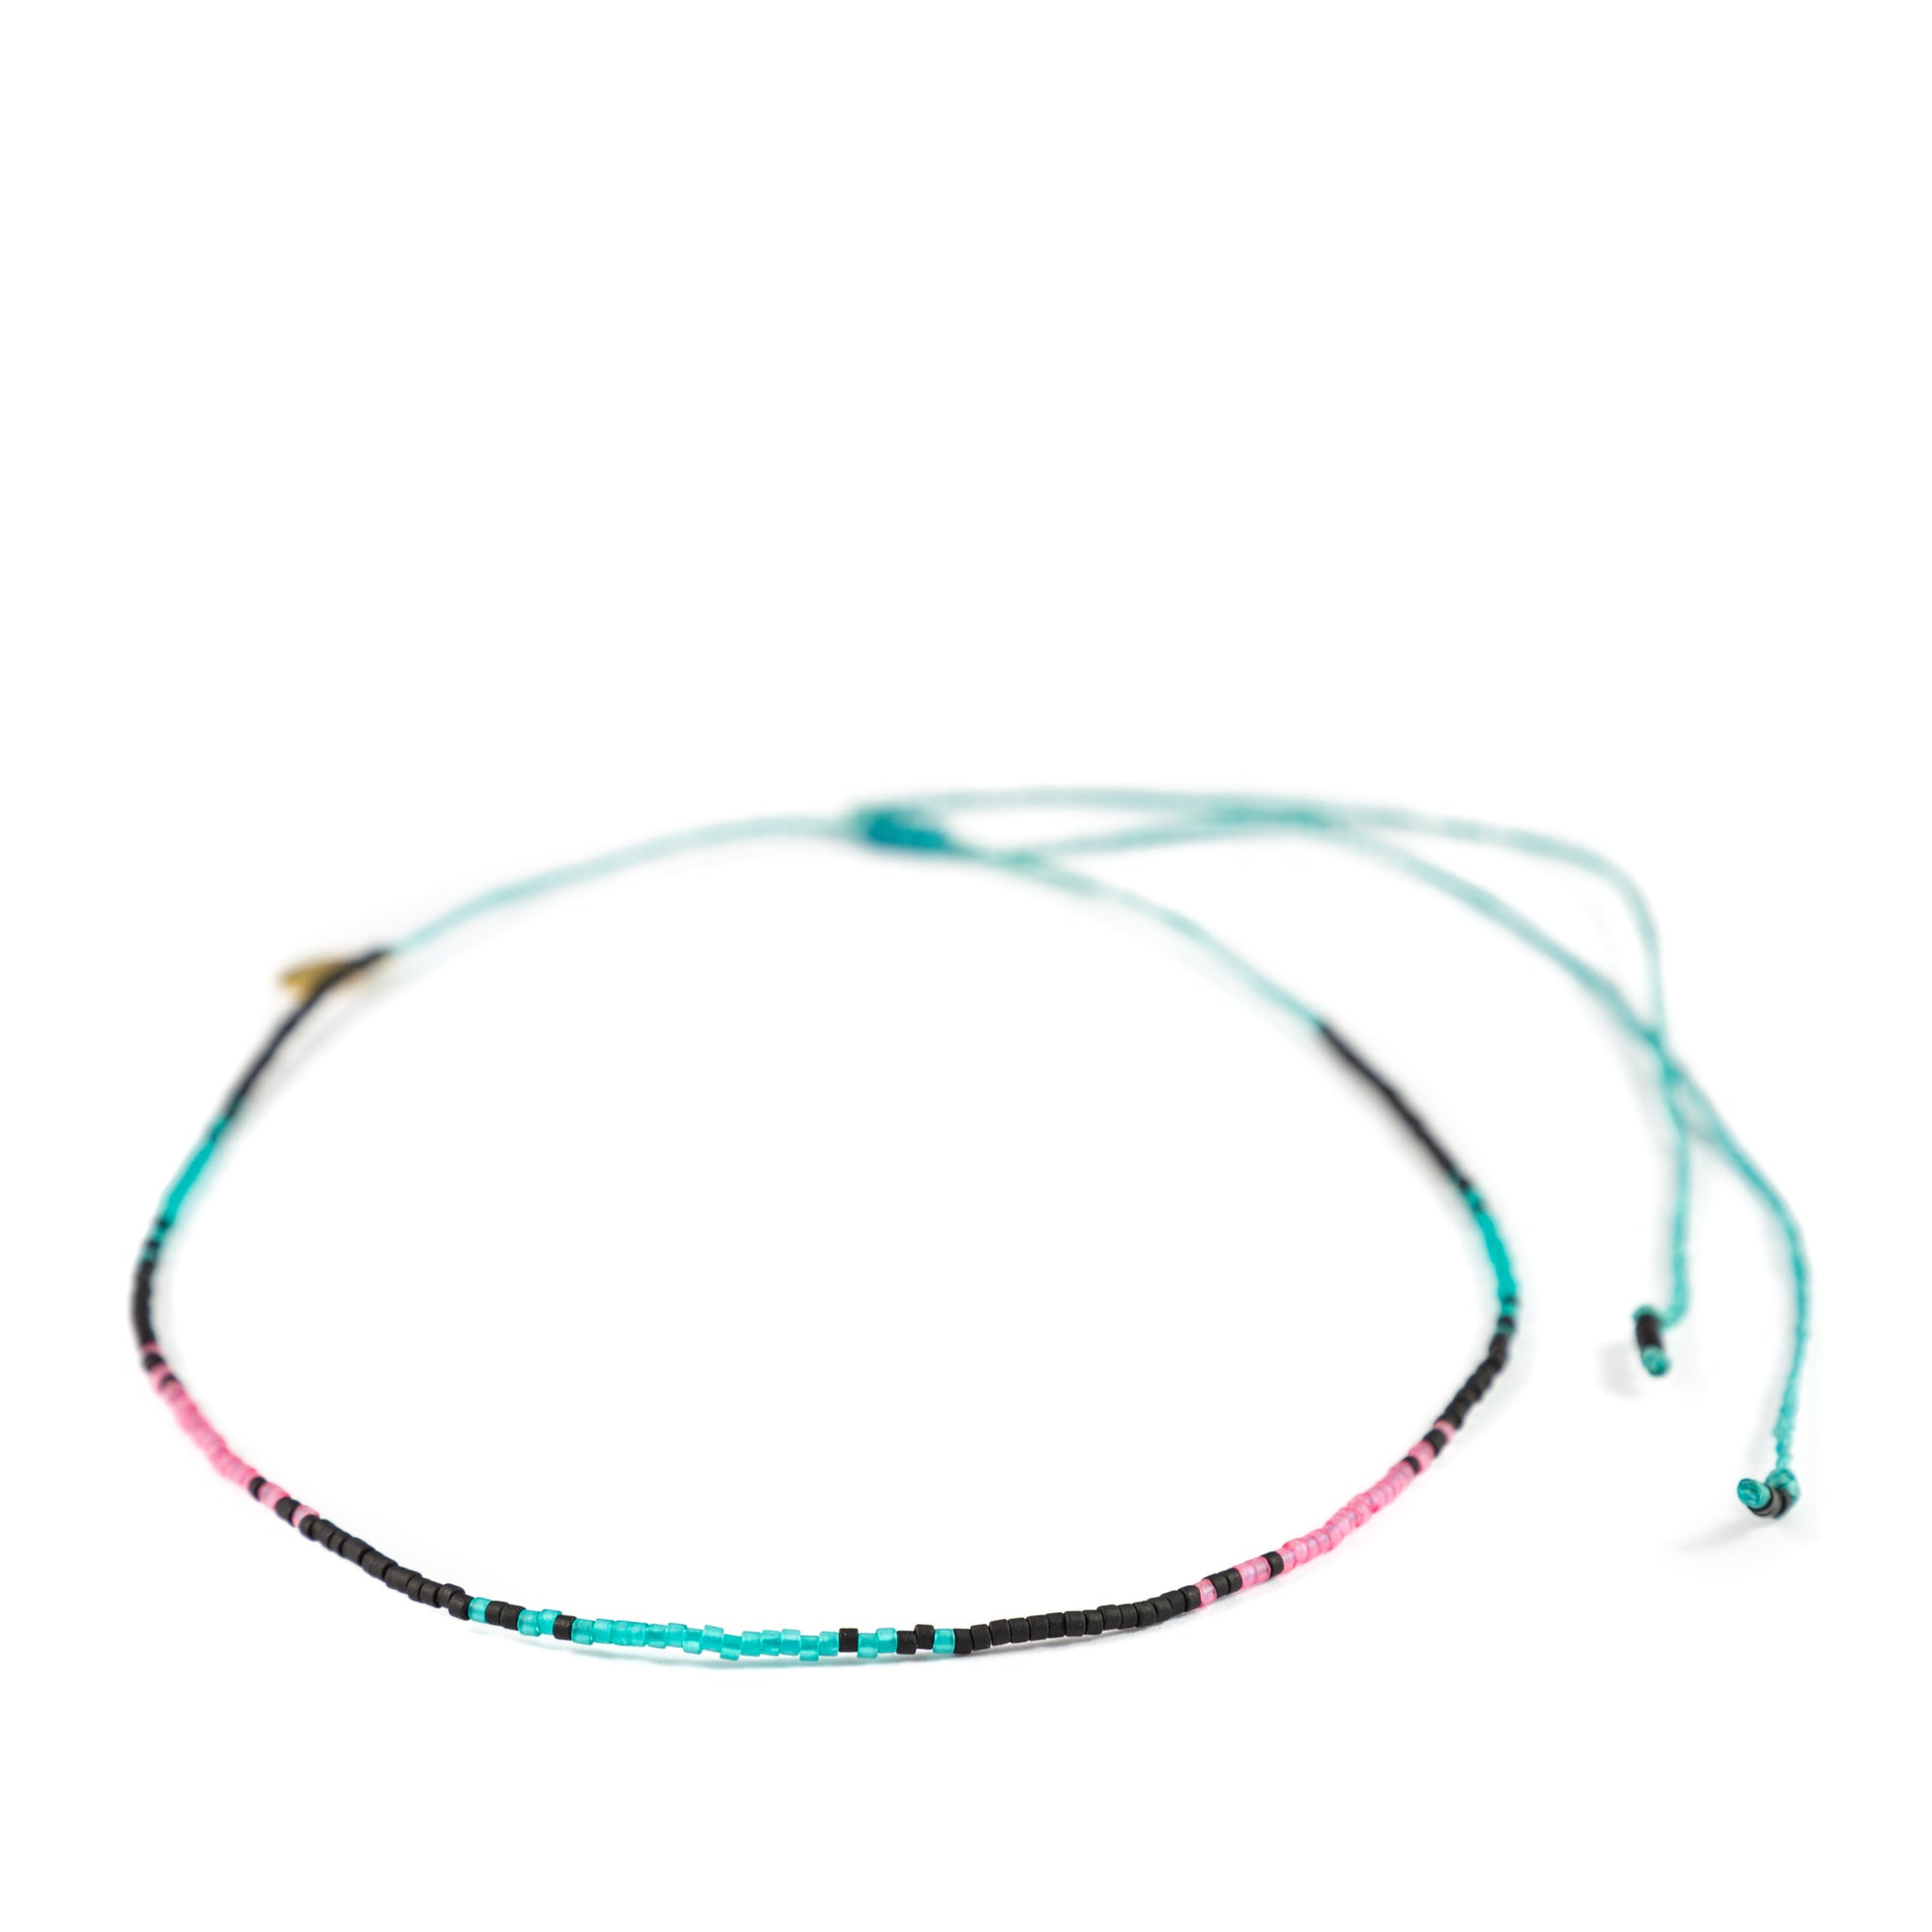 Sea Glass Teal & Pink Repeating Ombre Mermaid Necklace